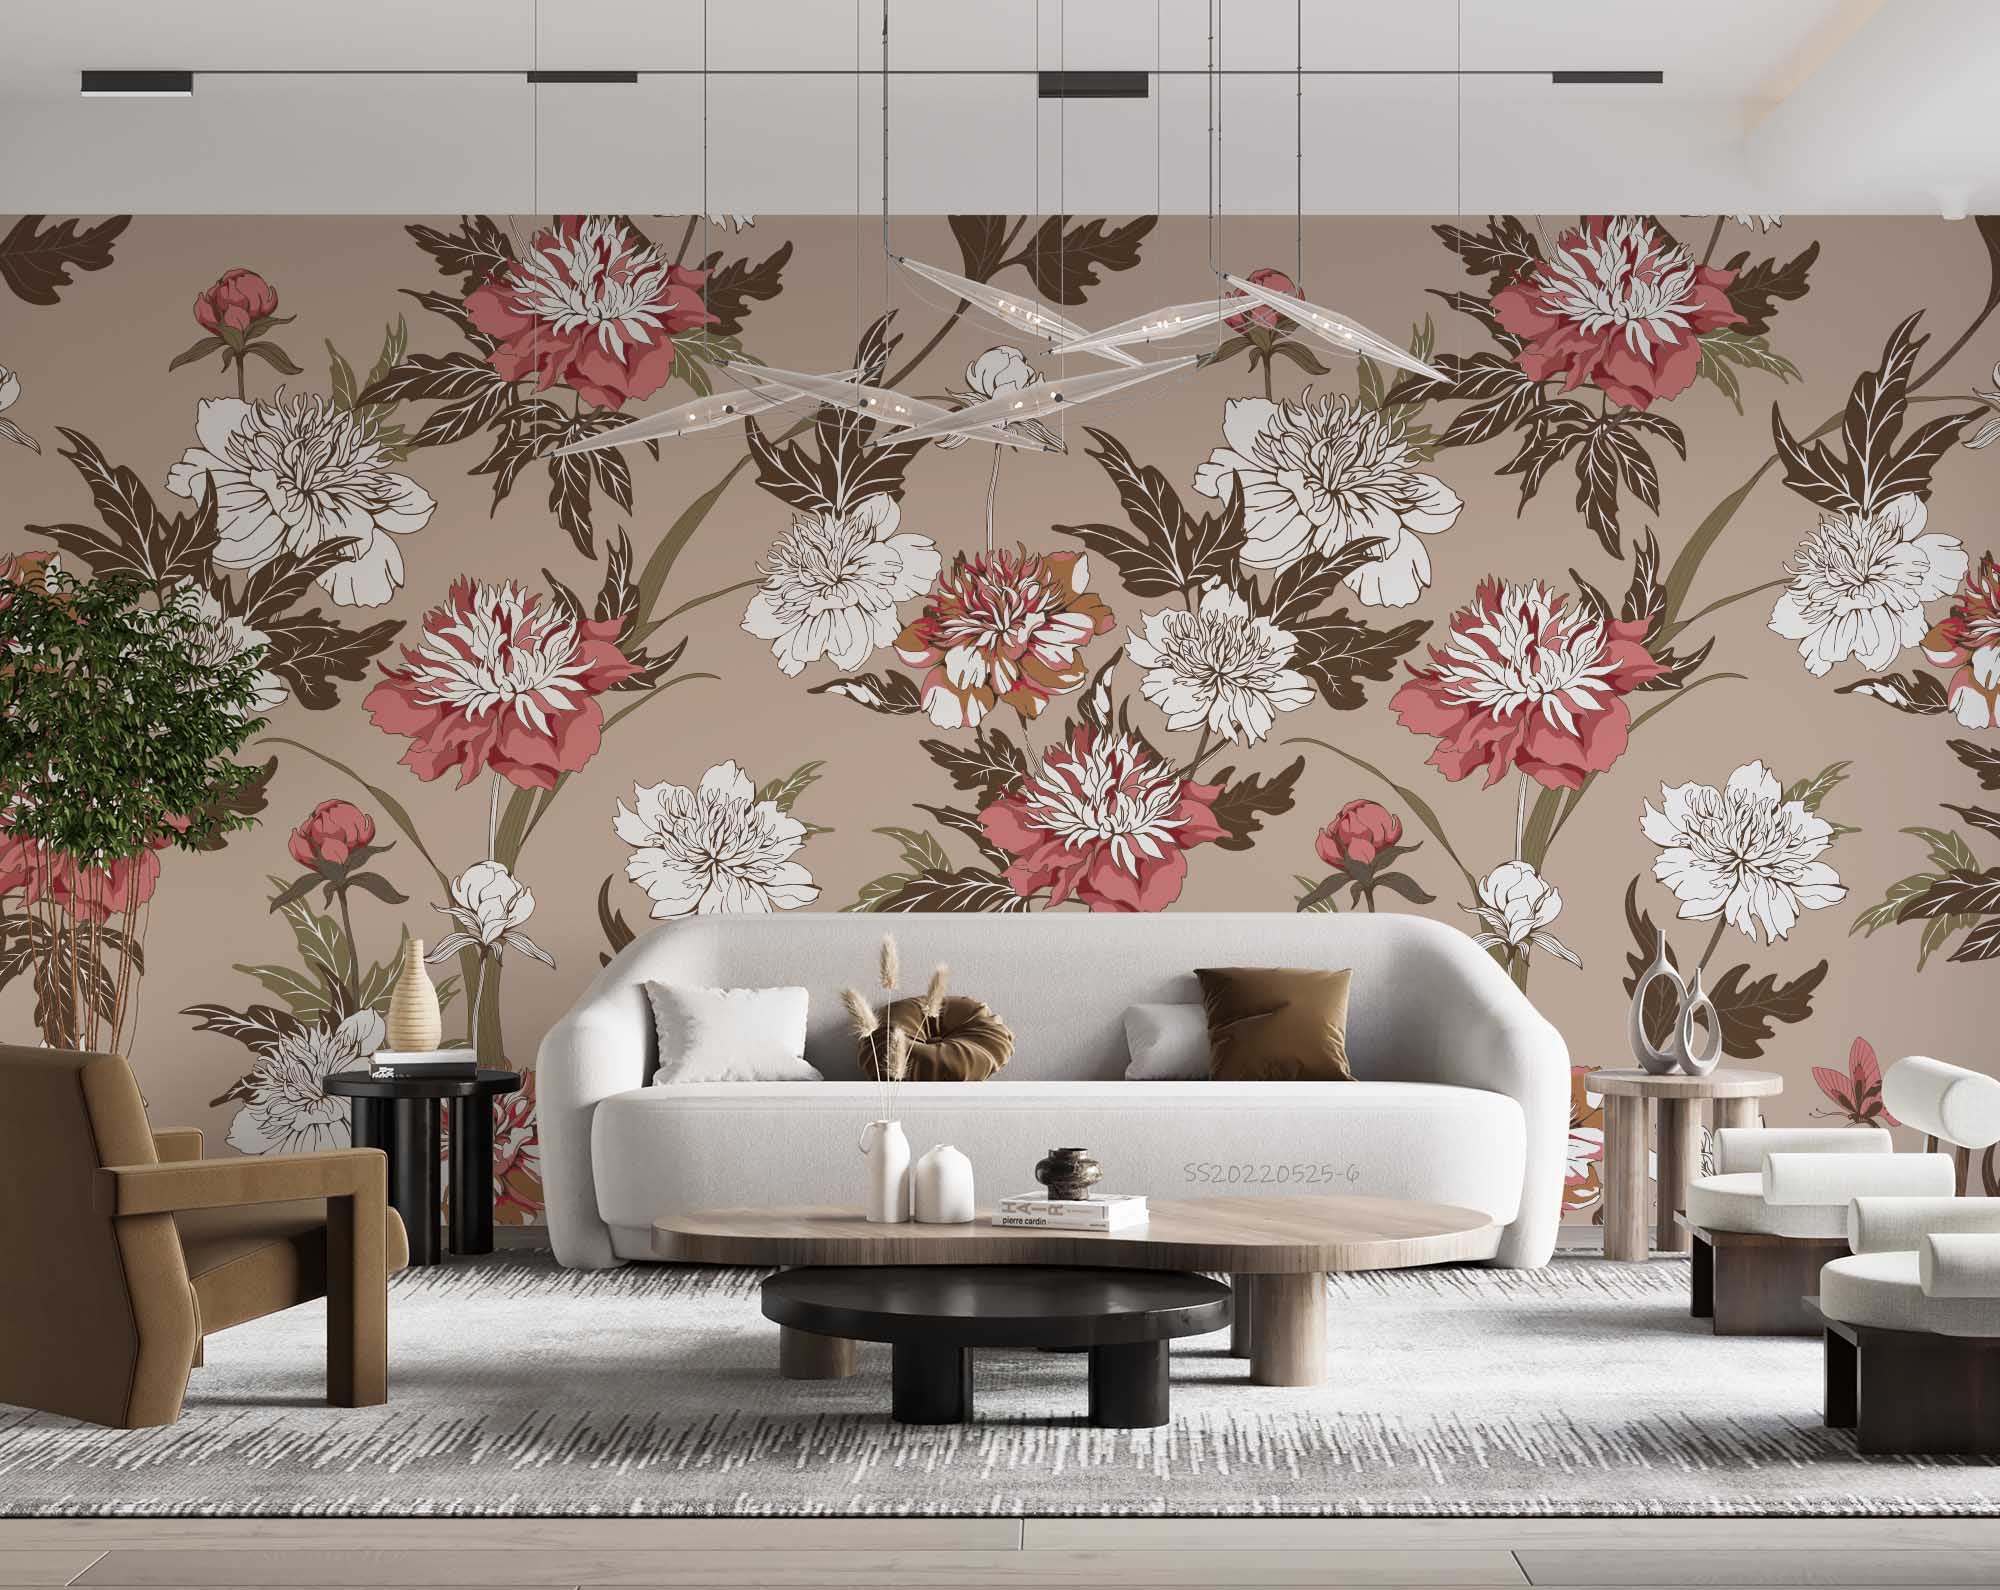 3D Vintage White Red Floral Pattern Wall Mural Wallpaper GD 1232- Jess Art Decoration